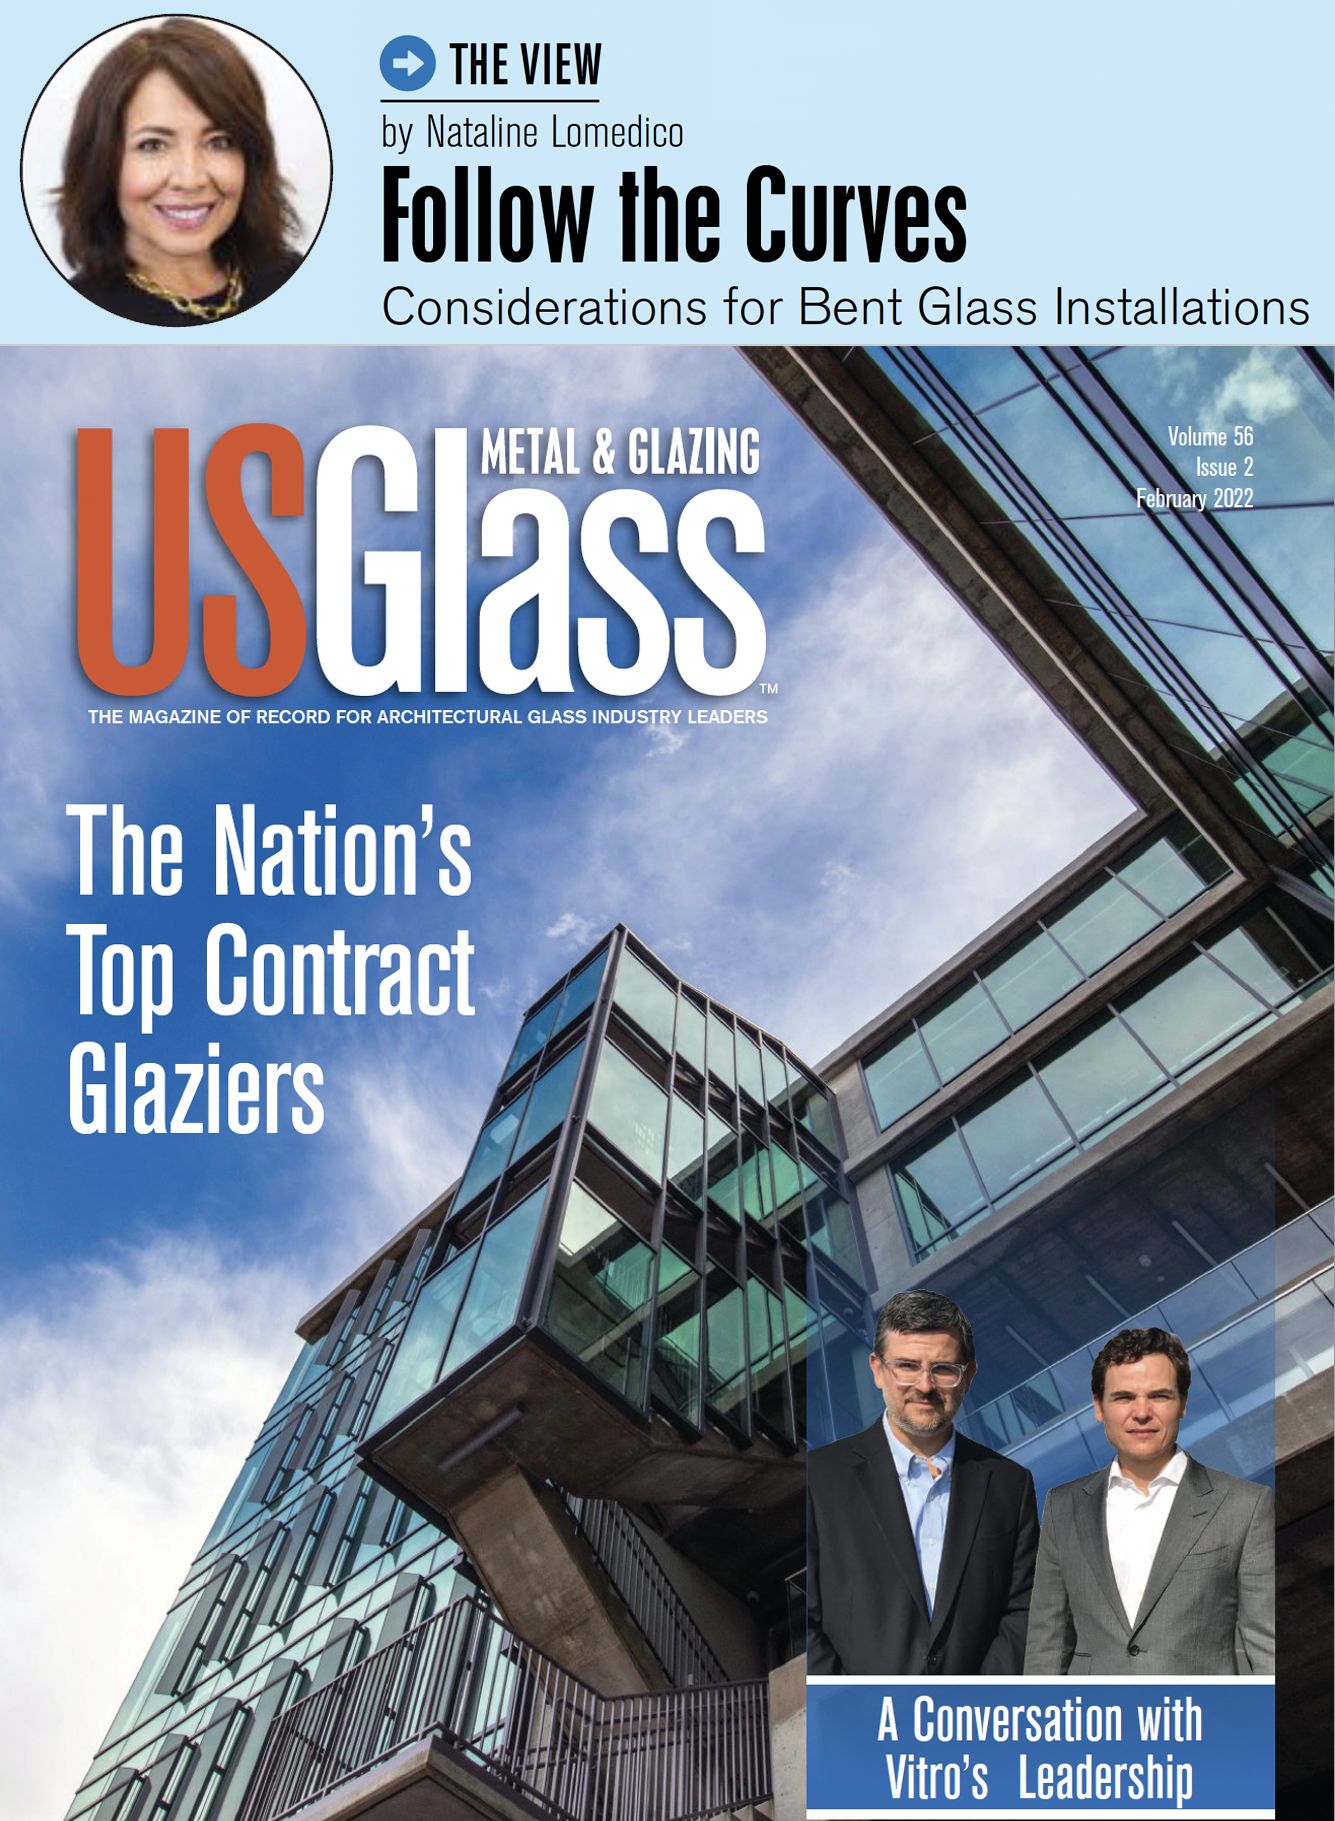 US Glass: Follow the Curves – The View by Nataline Lomedico